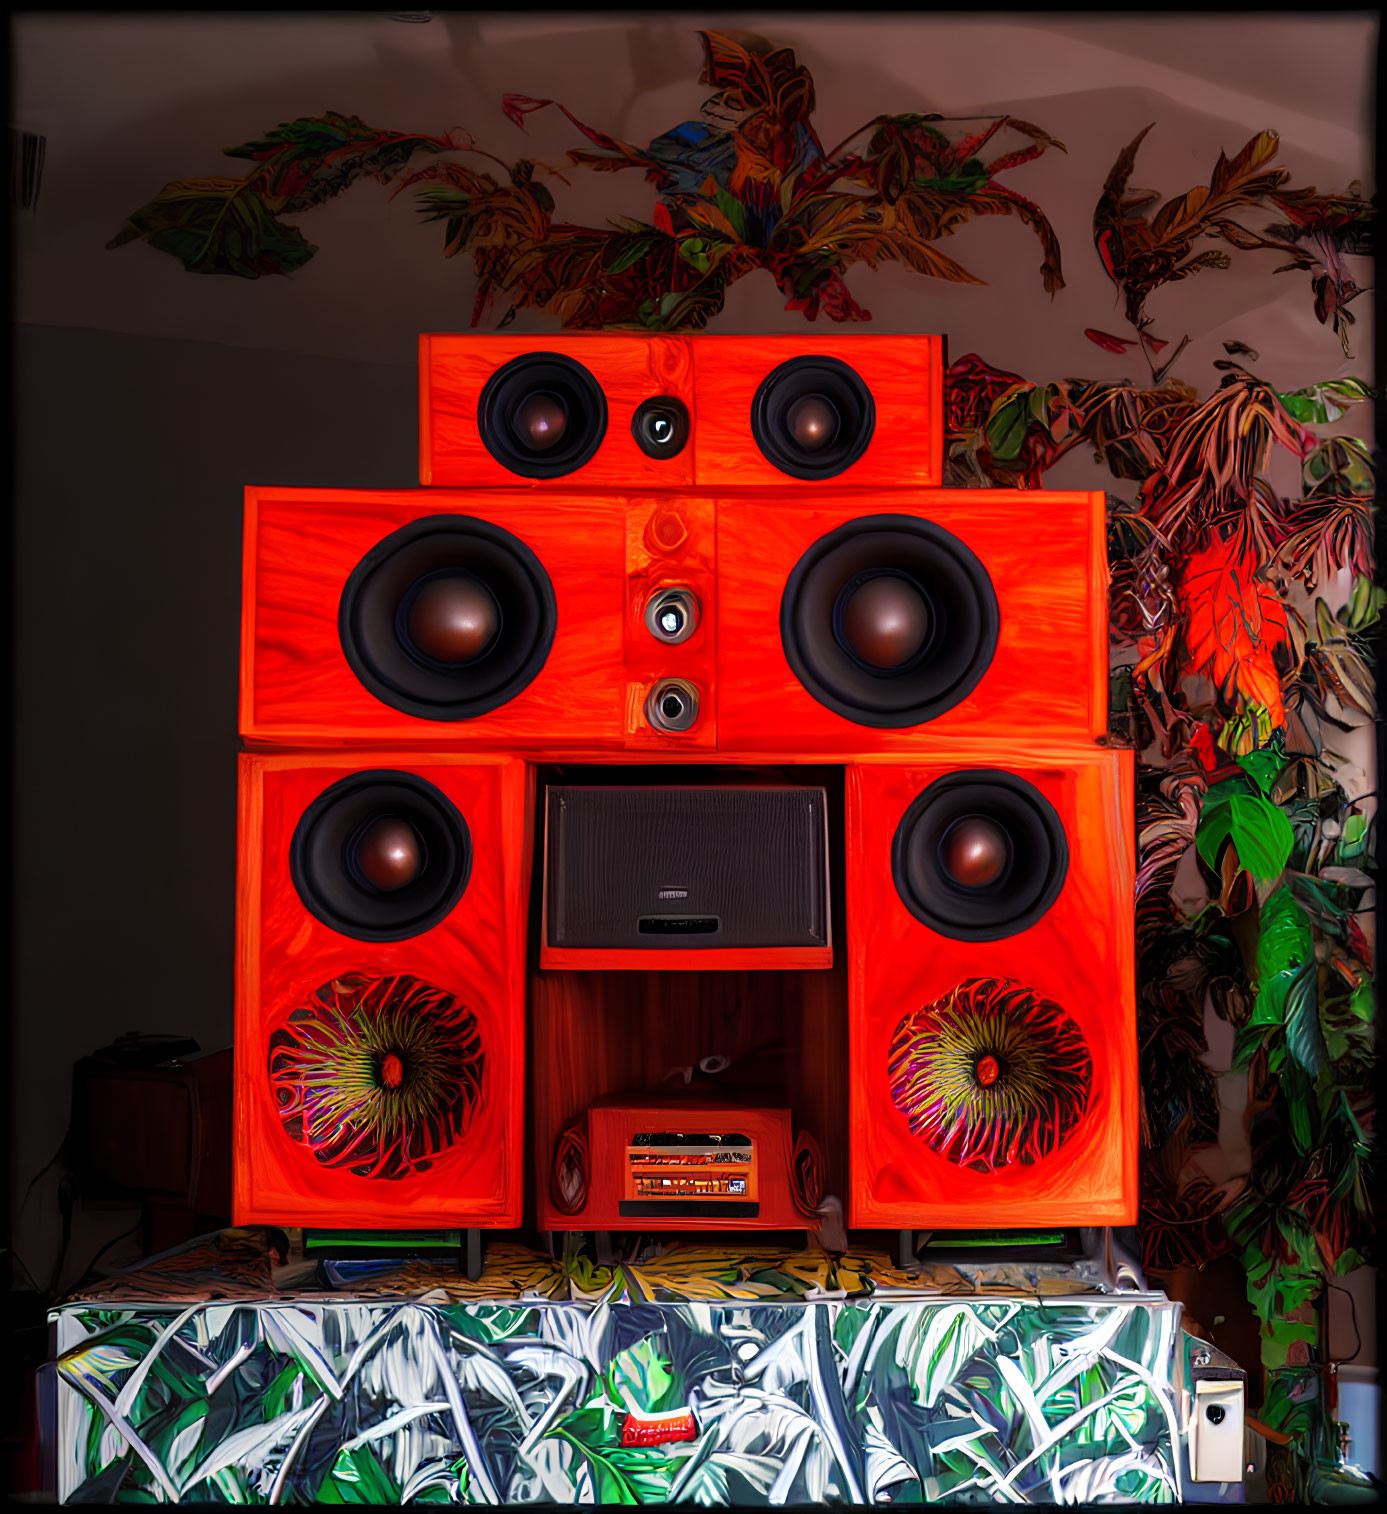 Vivid and Colorful Audio Setup with Red and Black Speakers in Graffiti Art Setting